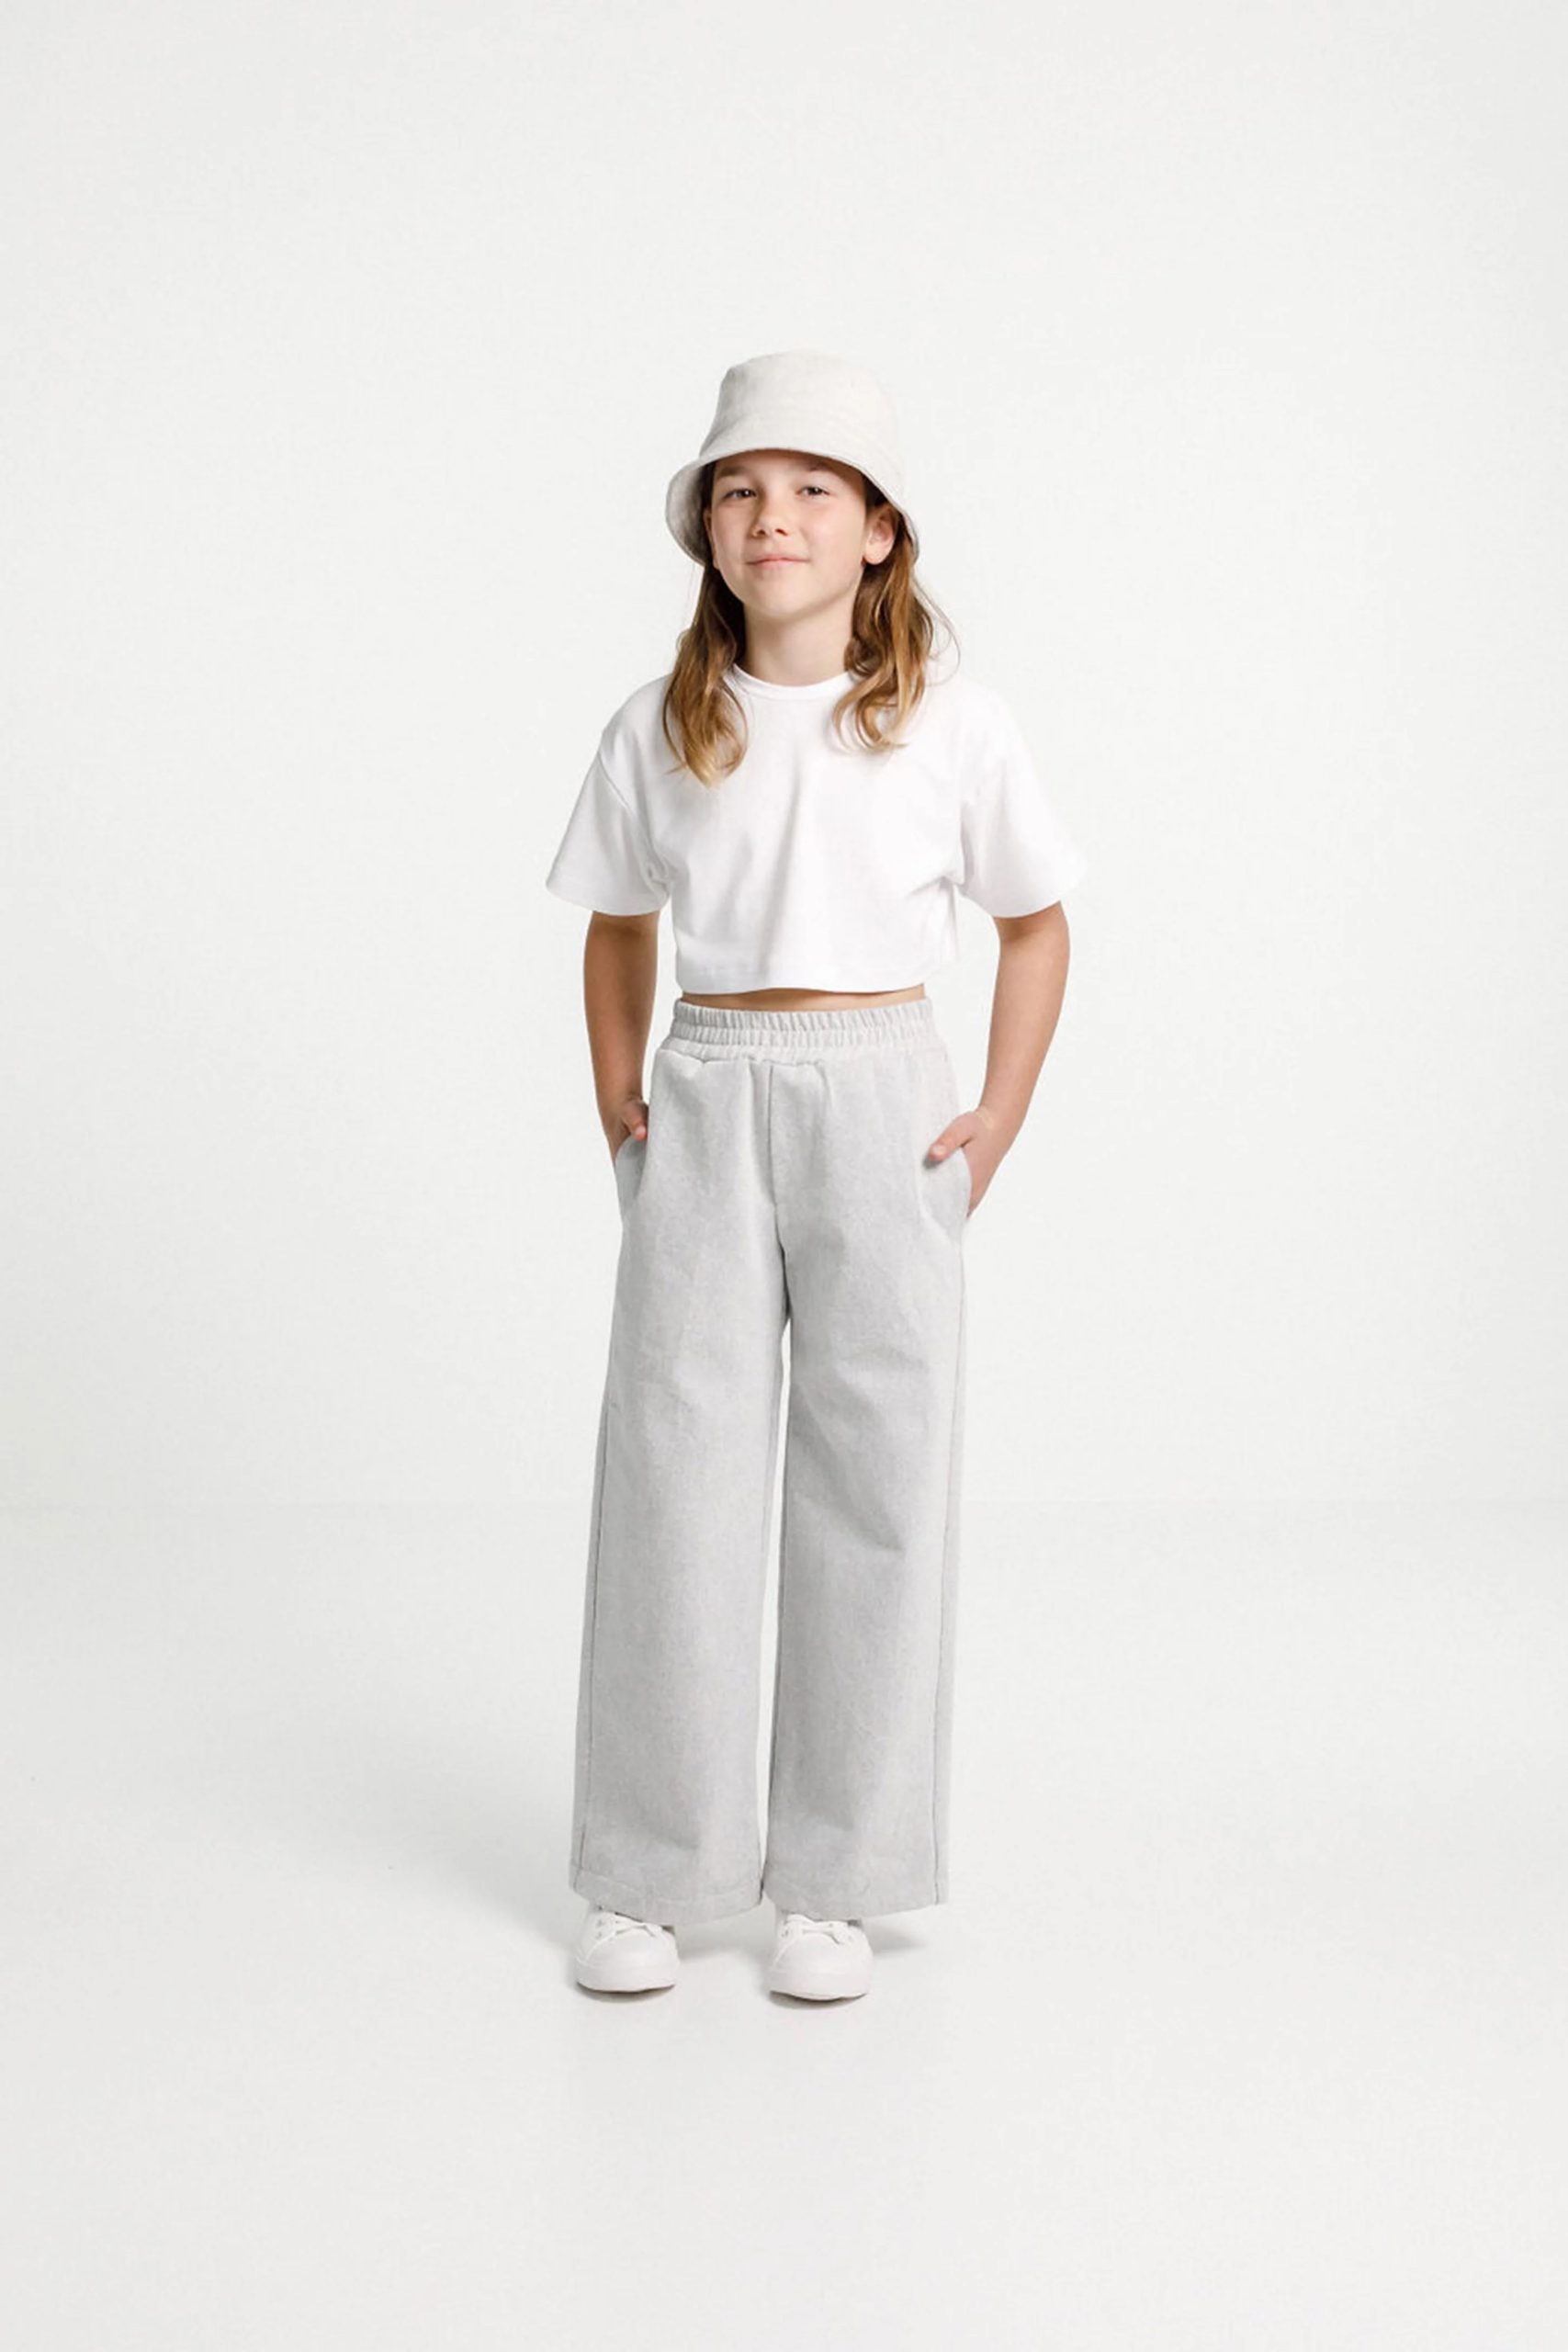 Child wearing the Child/Teen Tula Pants sewing pattern from Papercut Patterns on The Fold Line. A trouser pattern made in light to mid-weight woven or knit fabrics, linen, cotton, sweatshirting and blends fabrics, featuring an elasticated waistband, side 